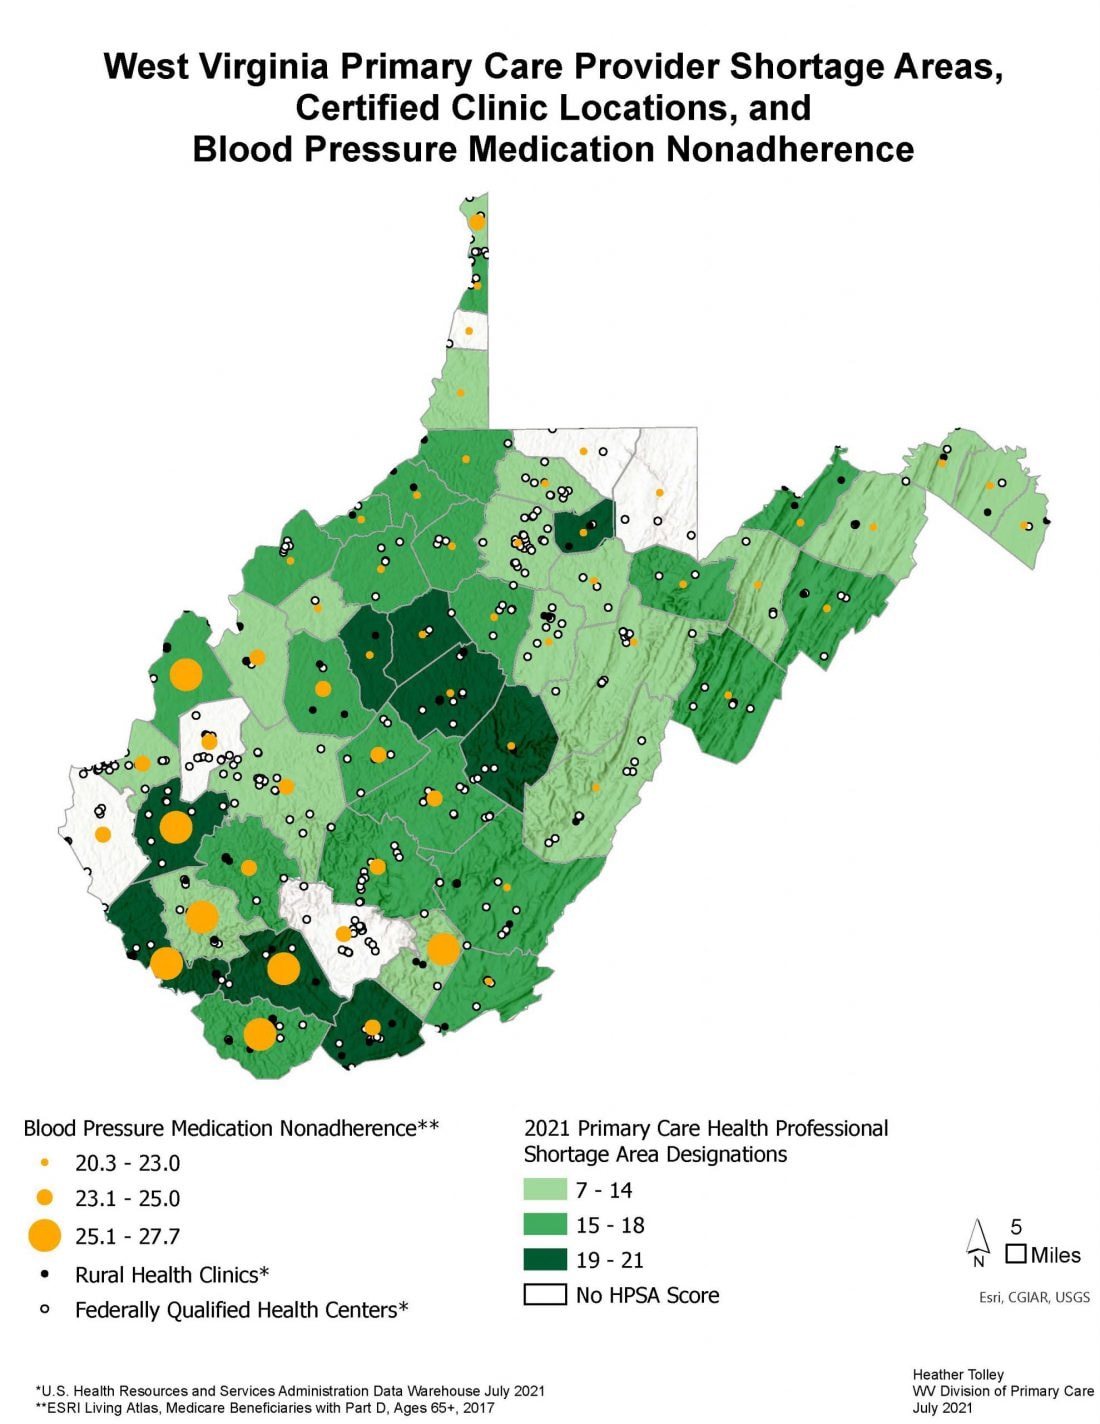 1.	West Virginia Primary Care Provider Shortages, Certified Clinic Locations, and Blood Pressure Medication Nonadherence